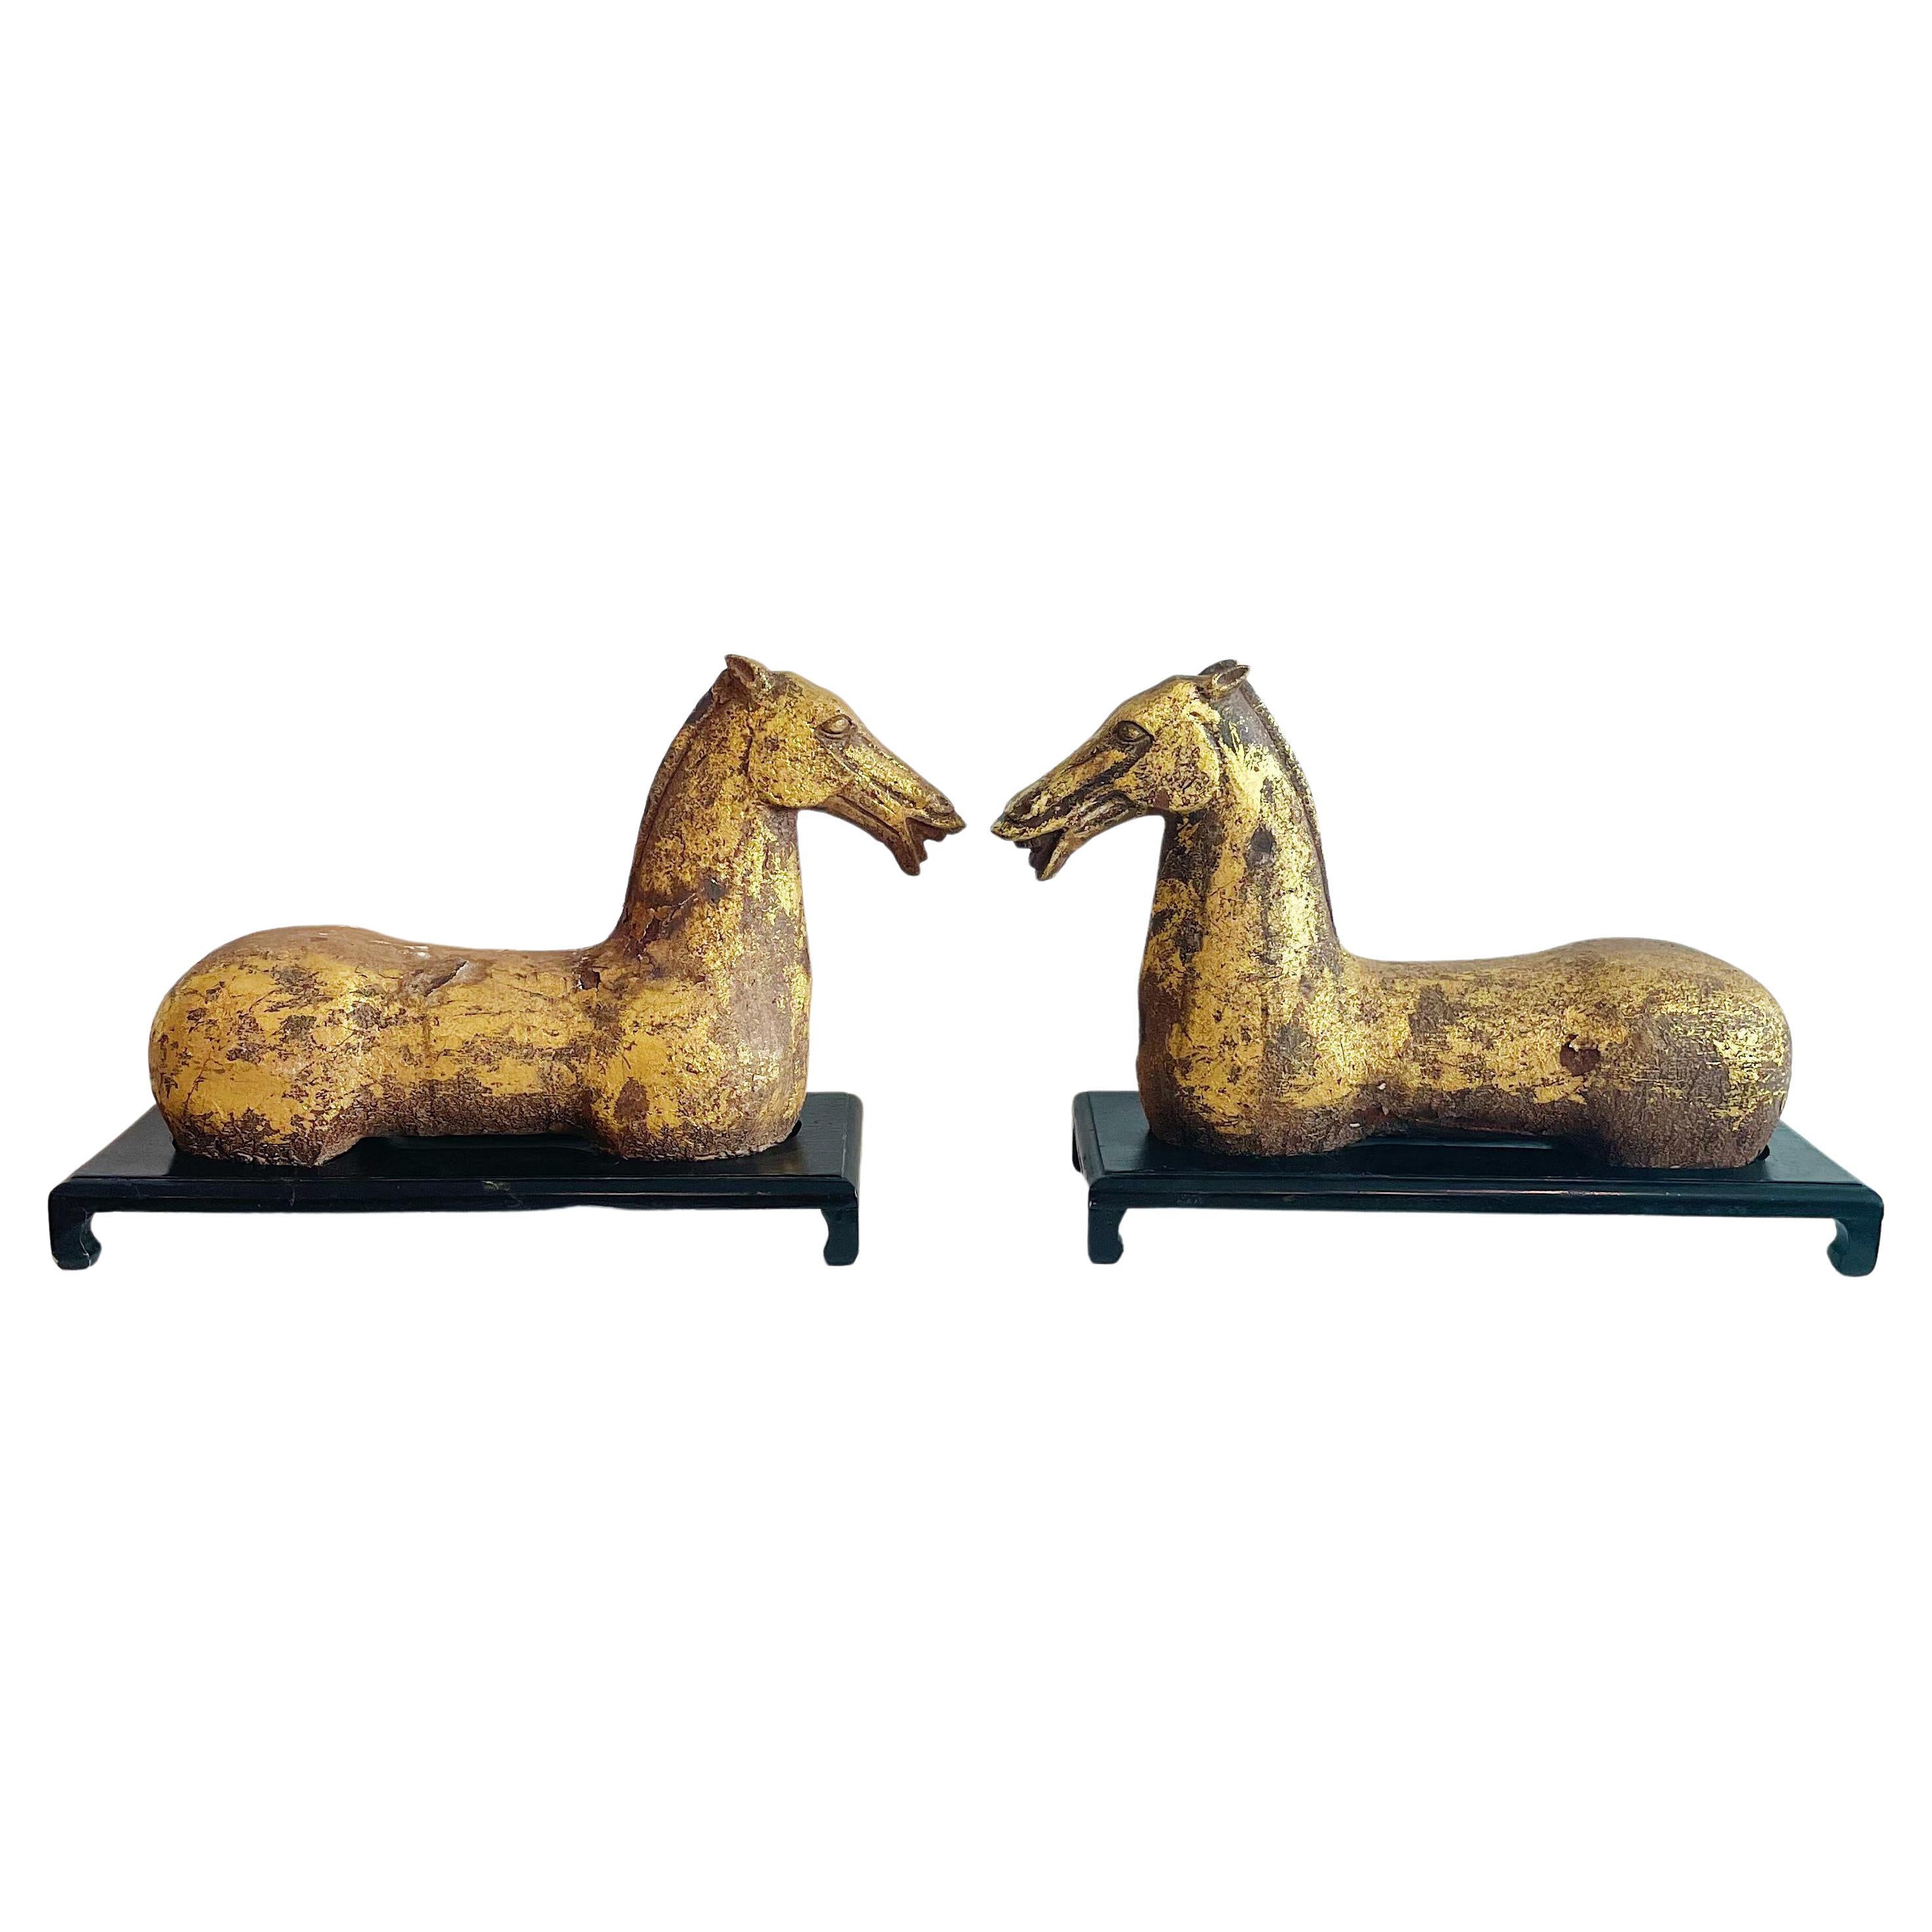 Pair of Gilt Iron Han Dynasty Style Opposing Horse Sculptures on Stands